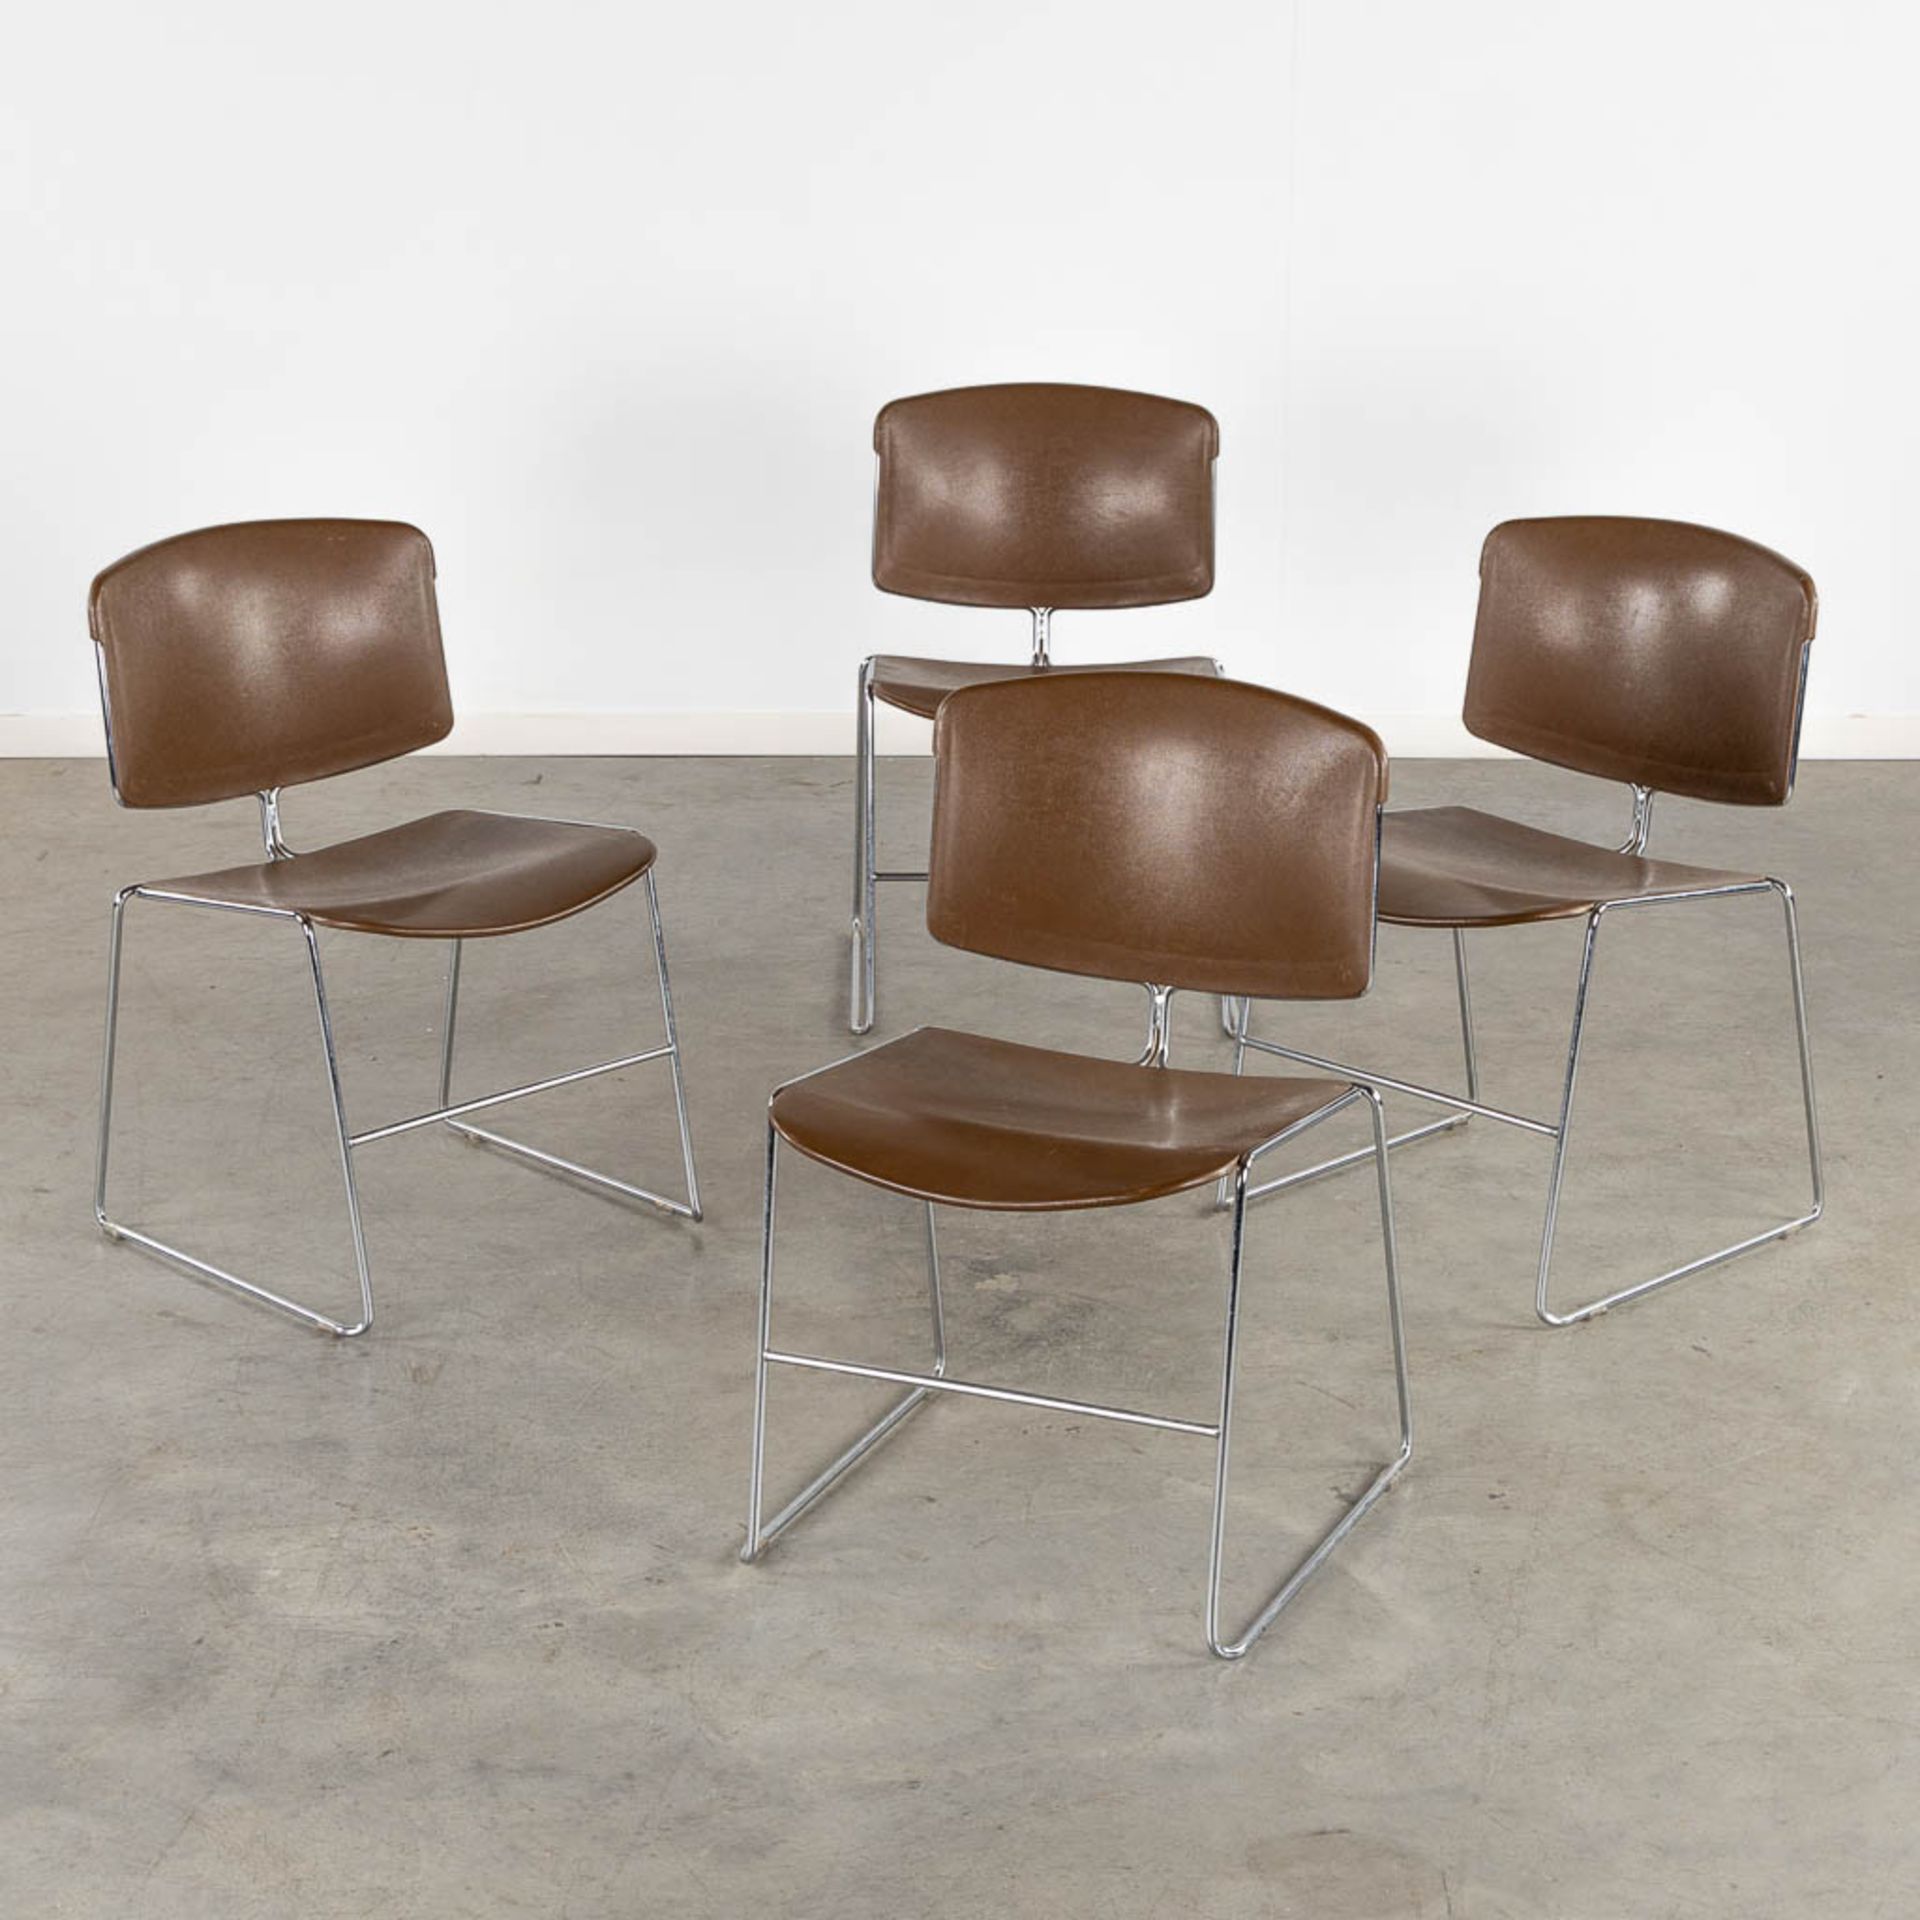 A set of 4 mid-century chairs 'Steelcase Max Stacker' chairs. (L:52 x W:50 x H:78 cm)